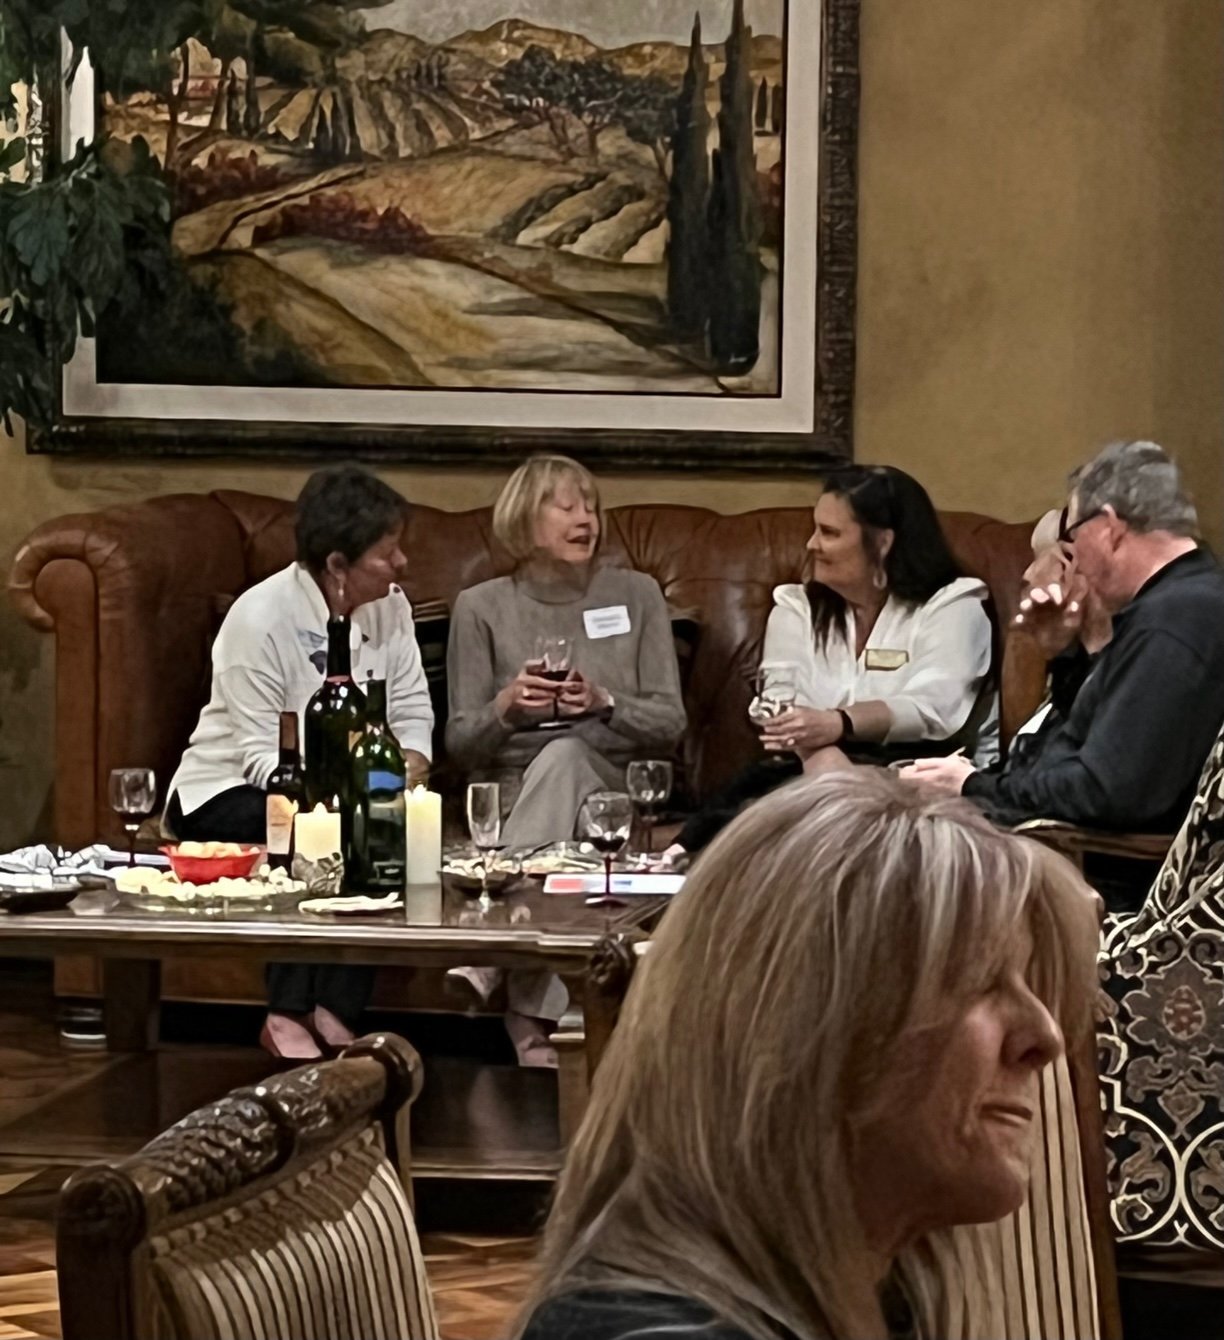  Wine, women, and politics socialize so well together    